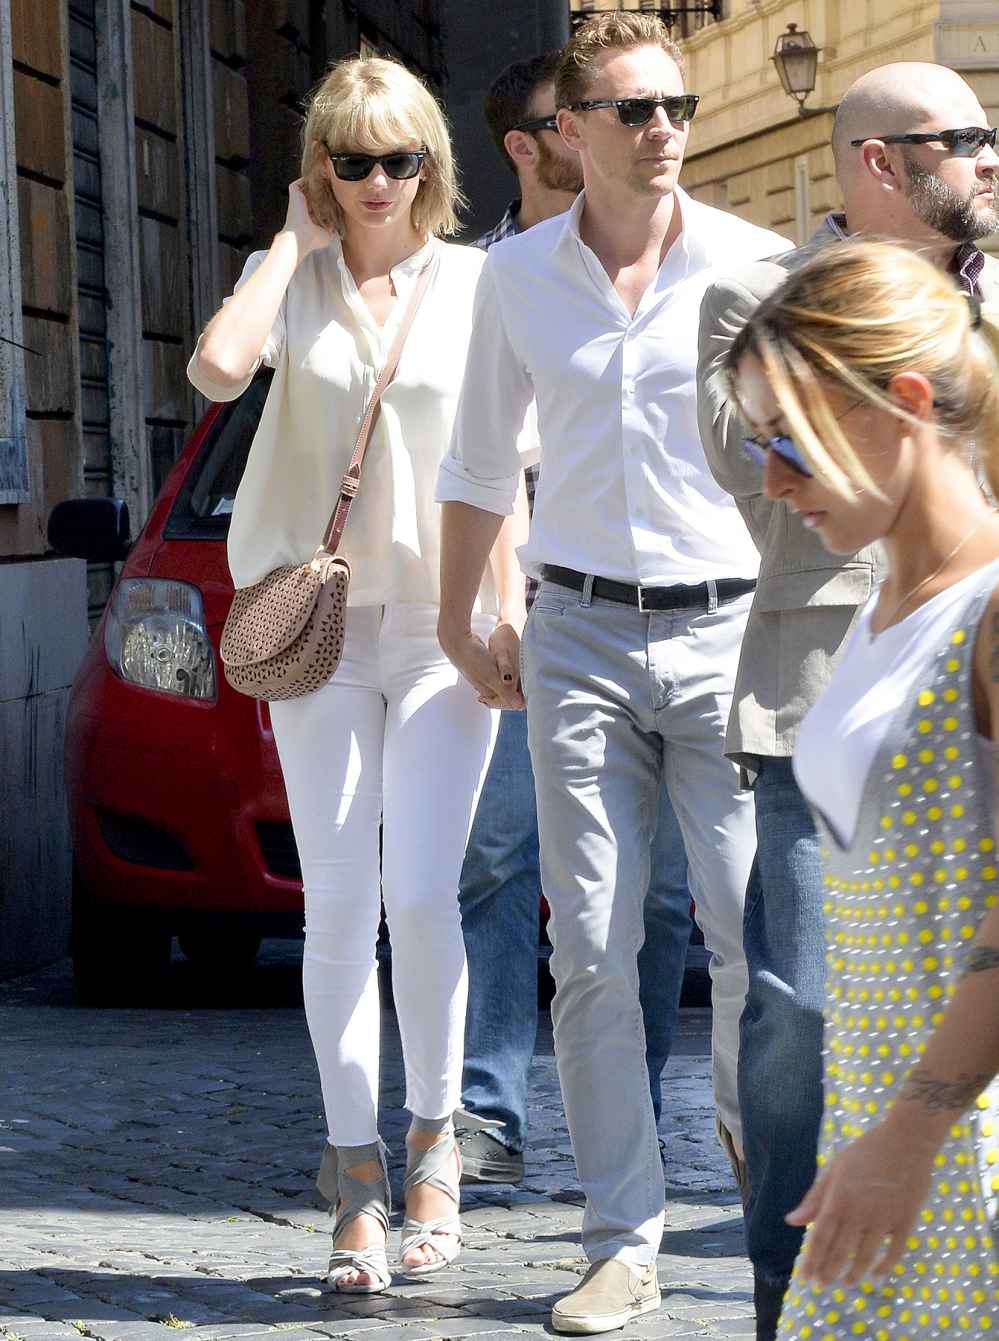 Taylor Swift is seen with Tom Hiddleston having breakfast near Piazza Navona in Rome, Italy.